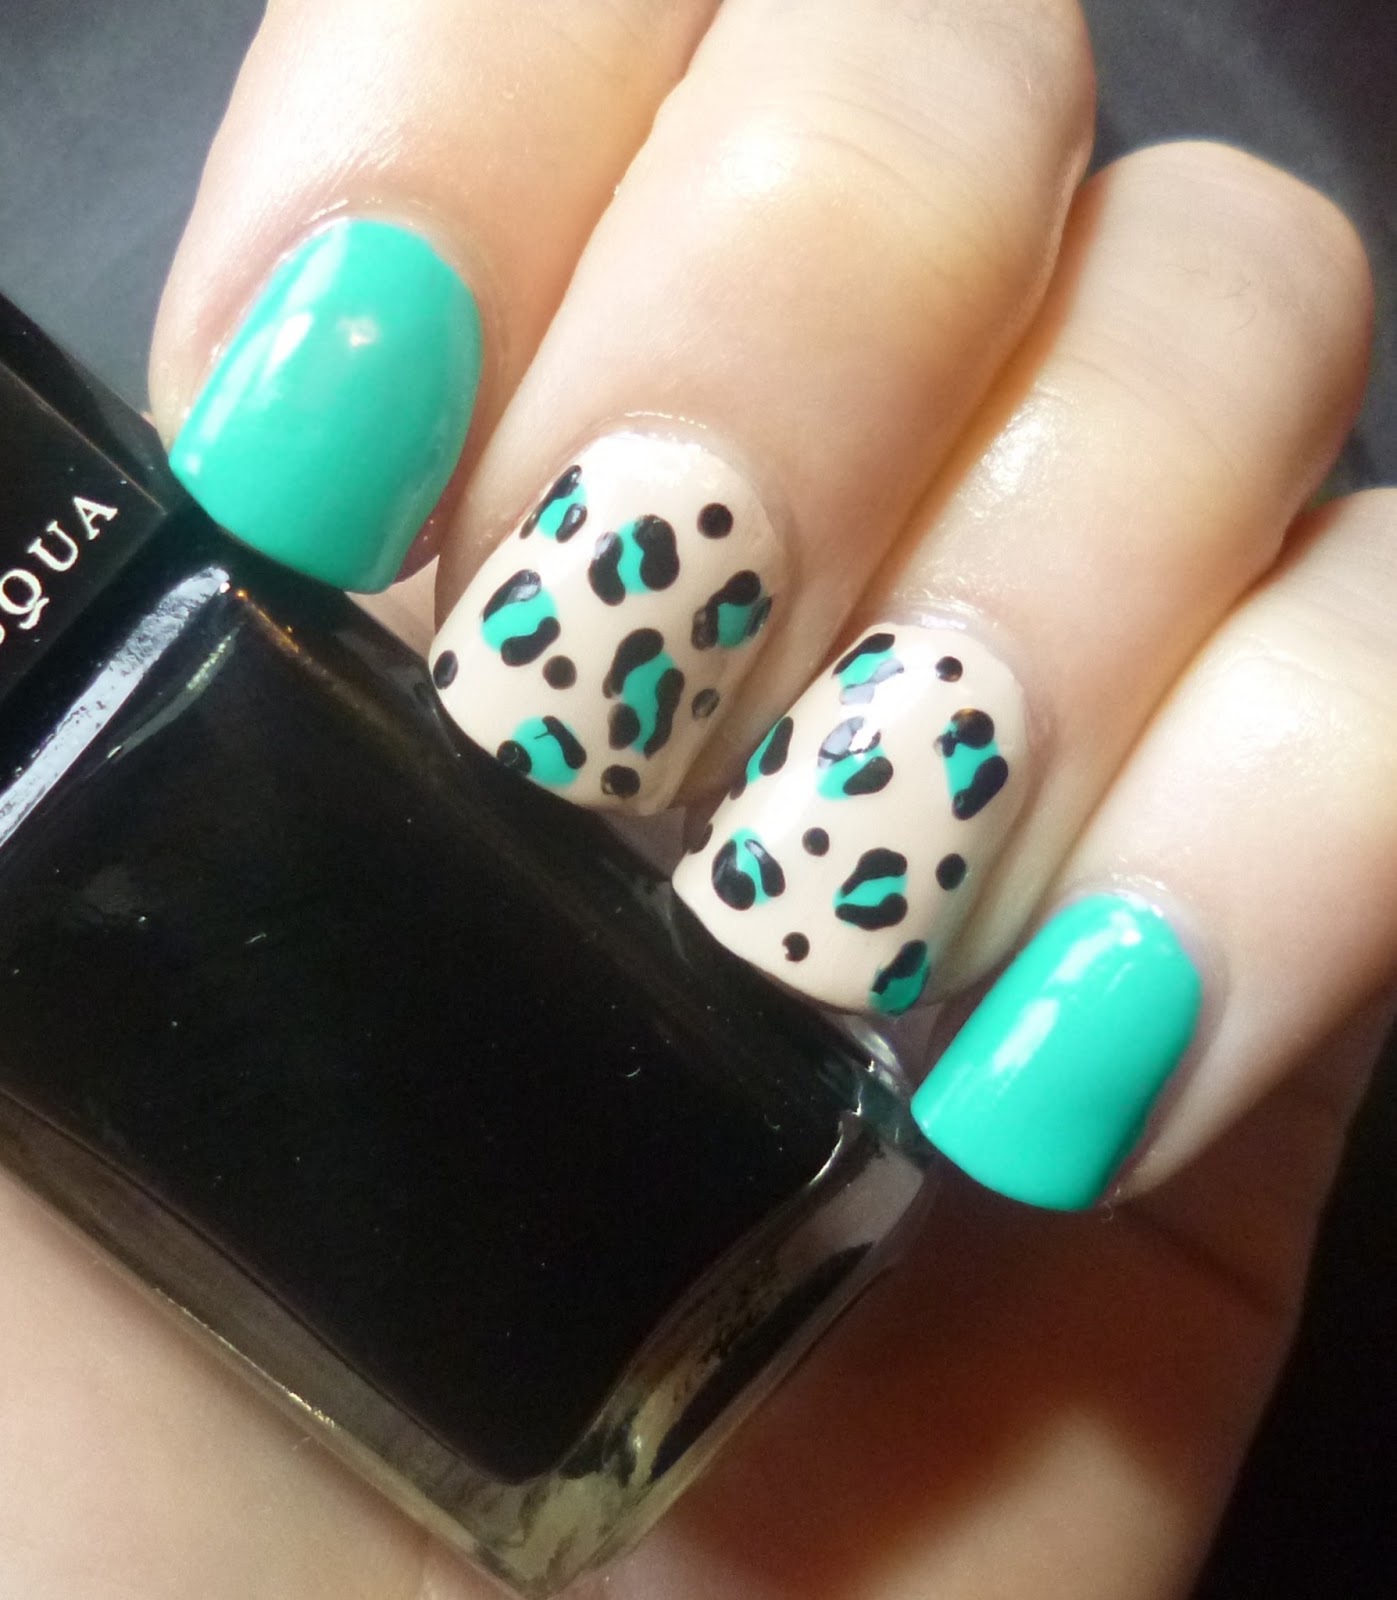 Lou is Perfectly Polished: Freehand Animal Accent nails